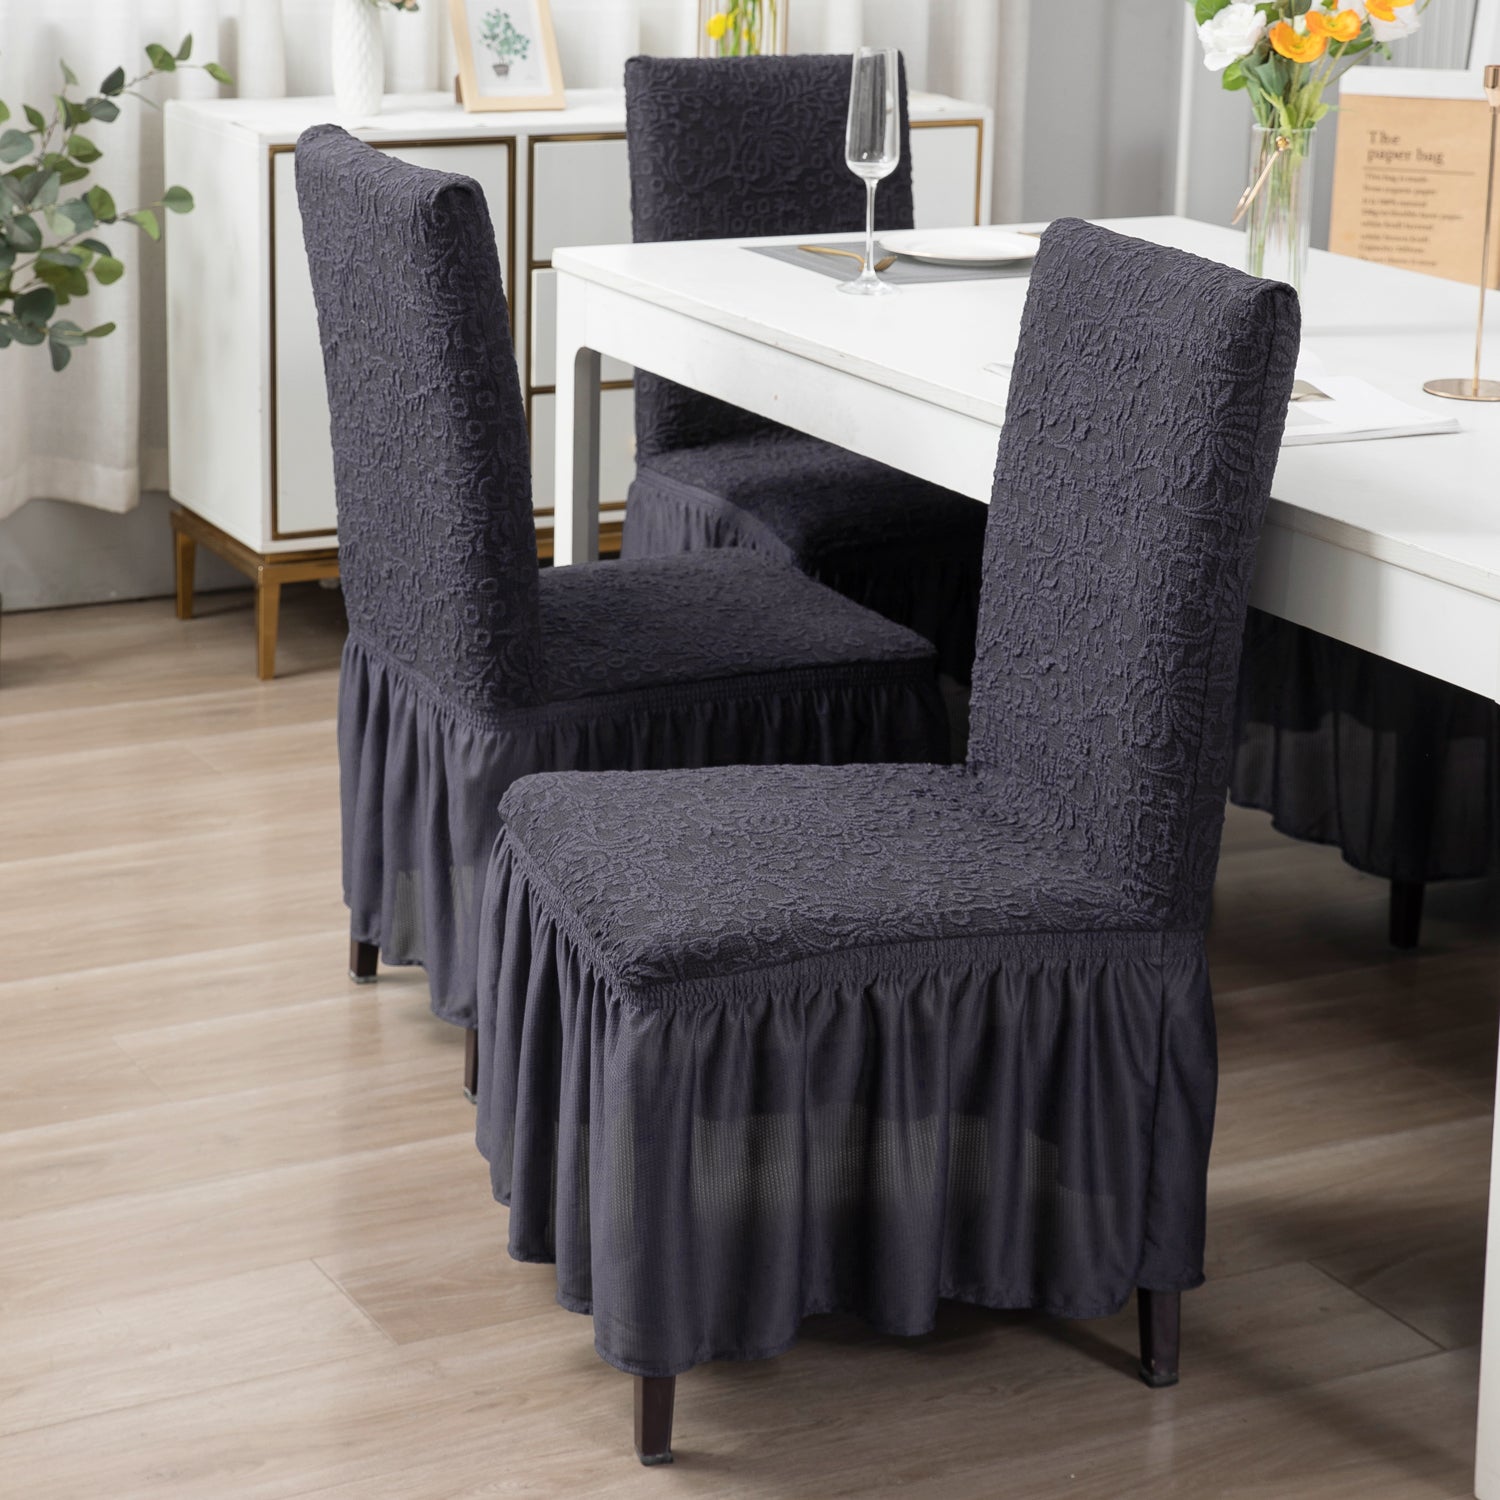 Elastic Stretchable Designer Woven Jacquard Dining Chair Cover with Frill, Abbey Grey